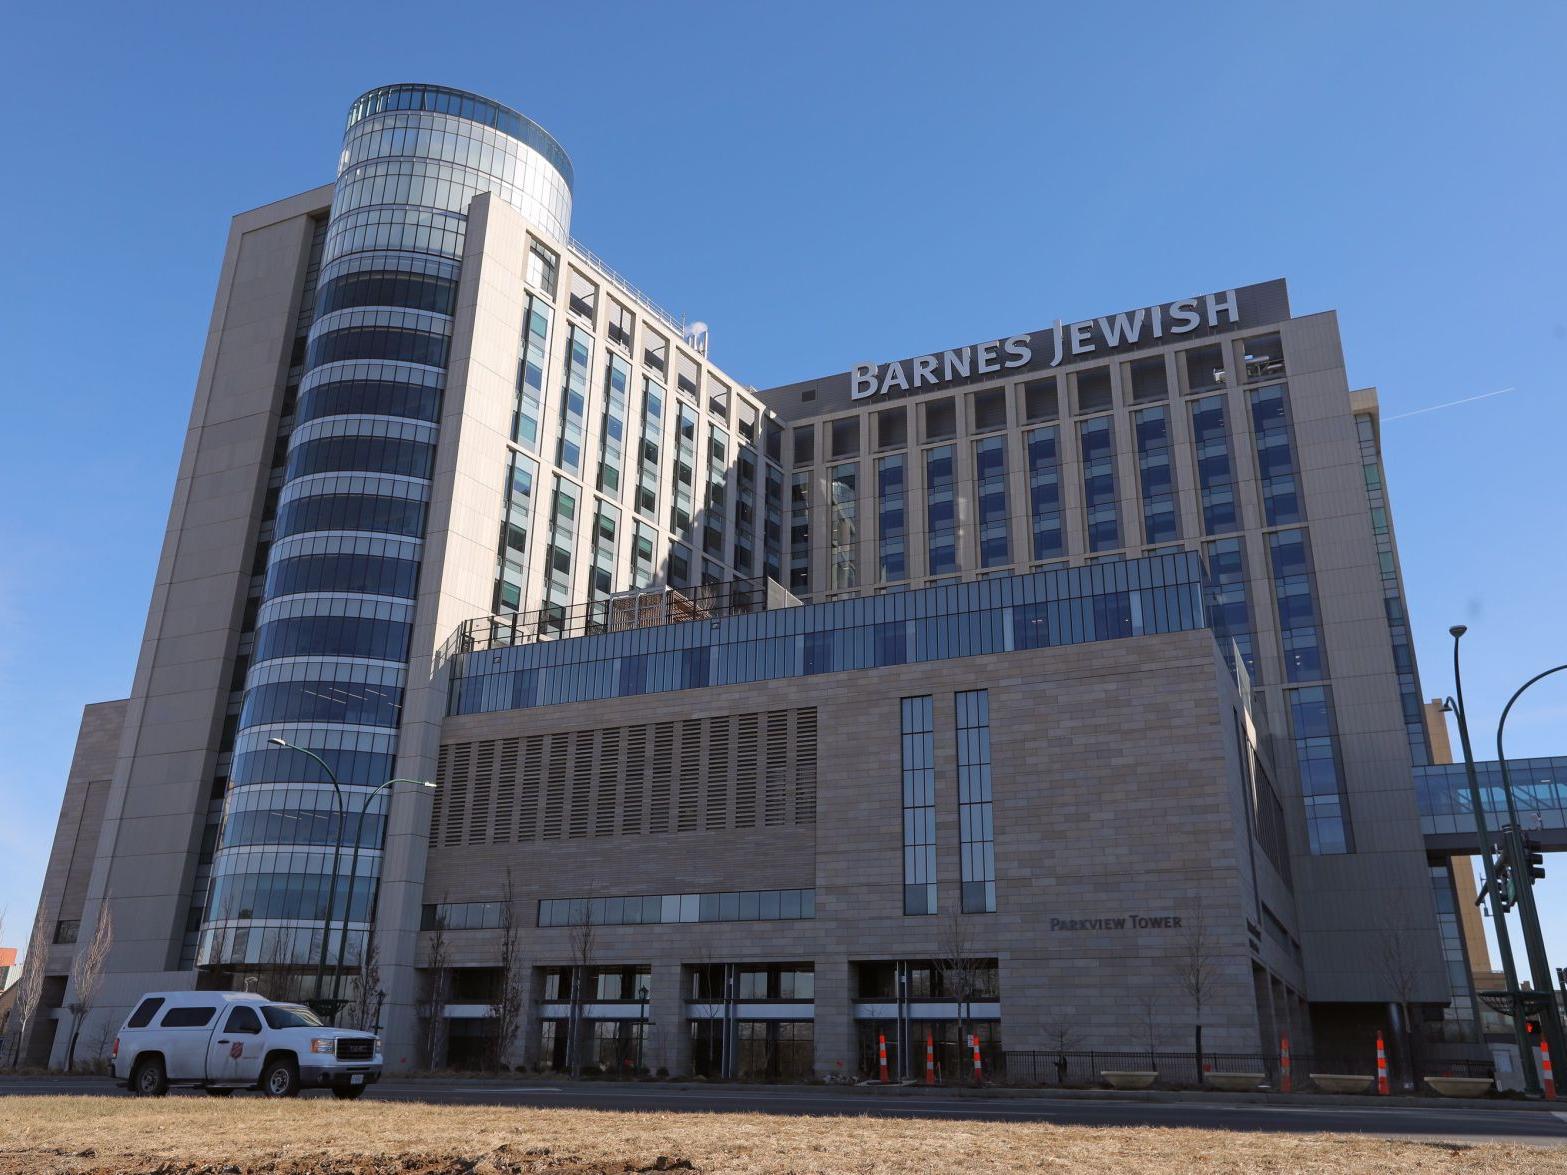 Bjc Healthcare Seeks 150 Million In Lawsuit Over Buckling Floors At New Hospital Towers Local Business Stltodaycom